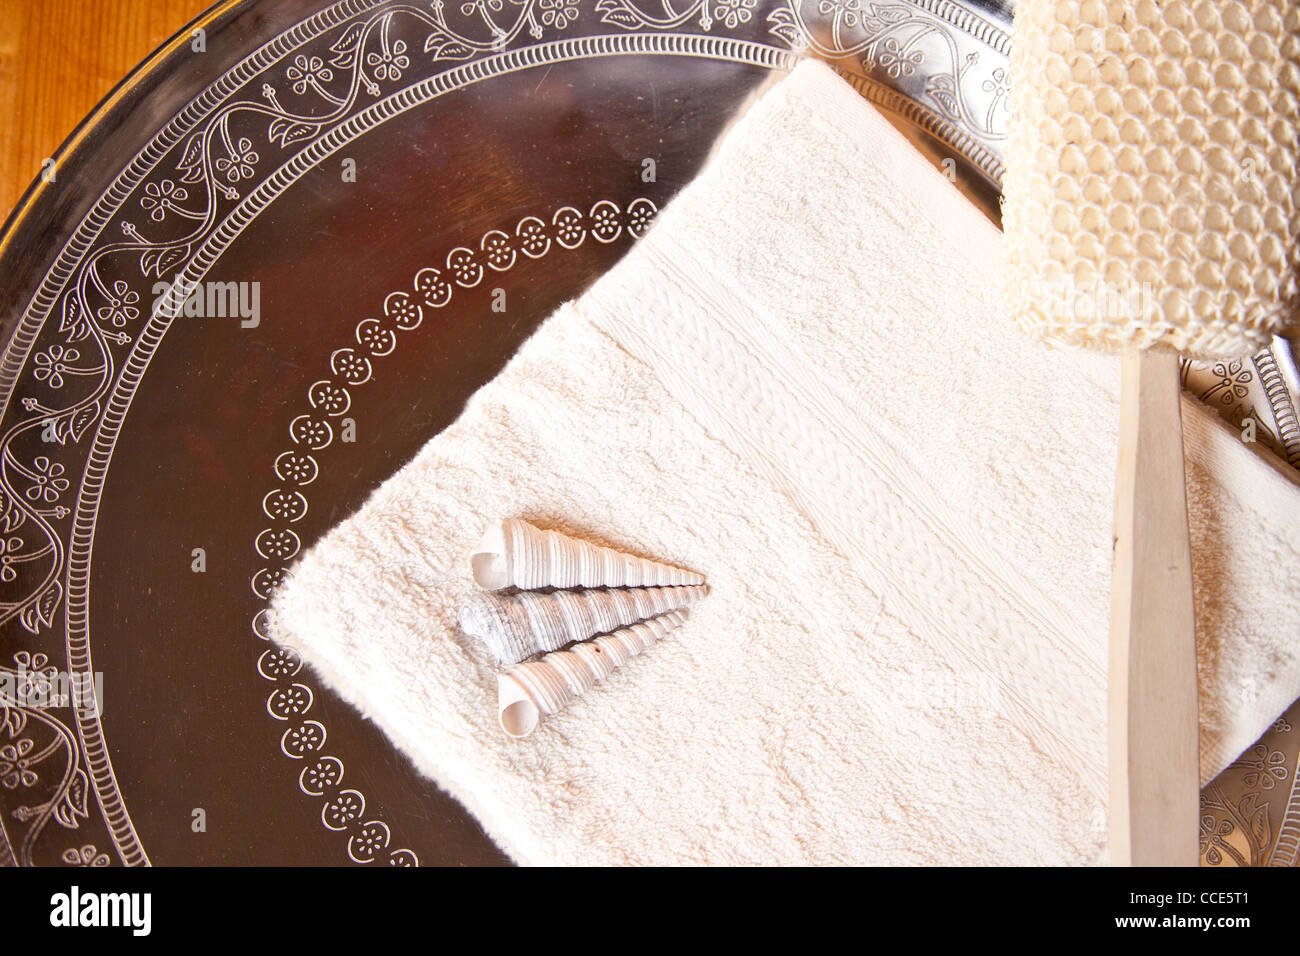 Luxury bath or shower set with towel, brush and shells on silver scale Stock Photo